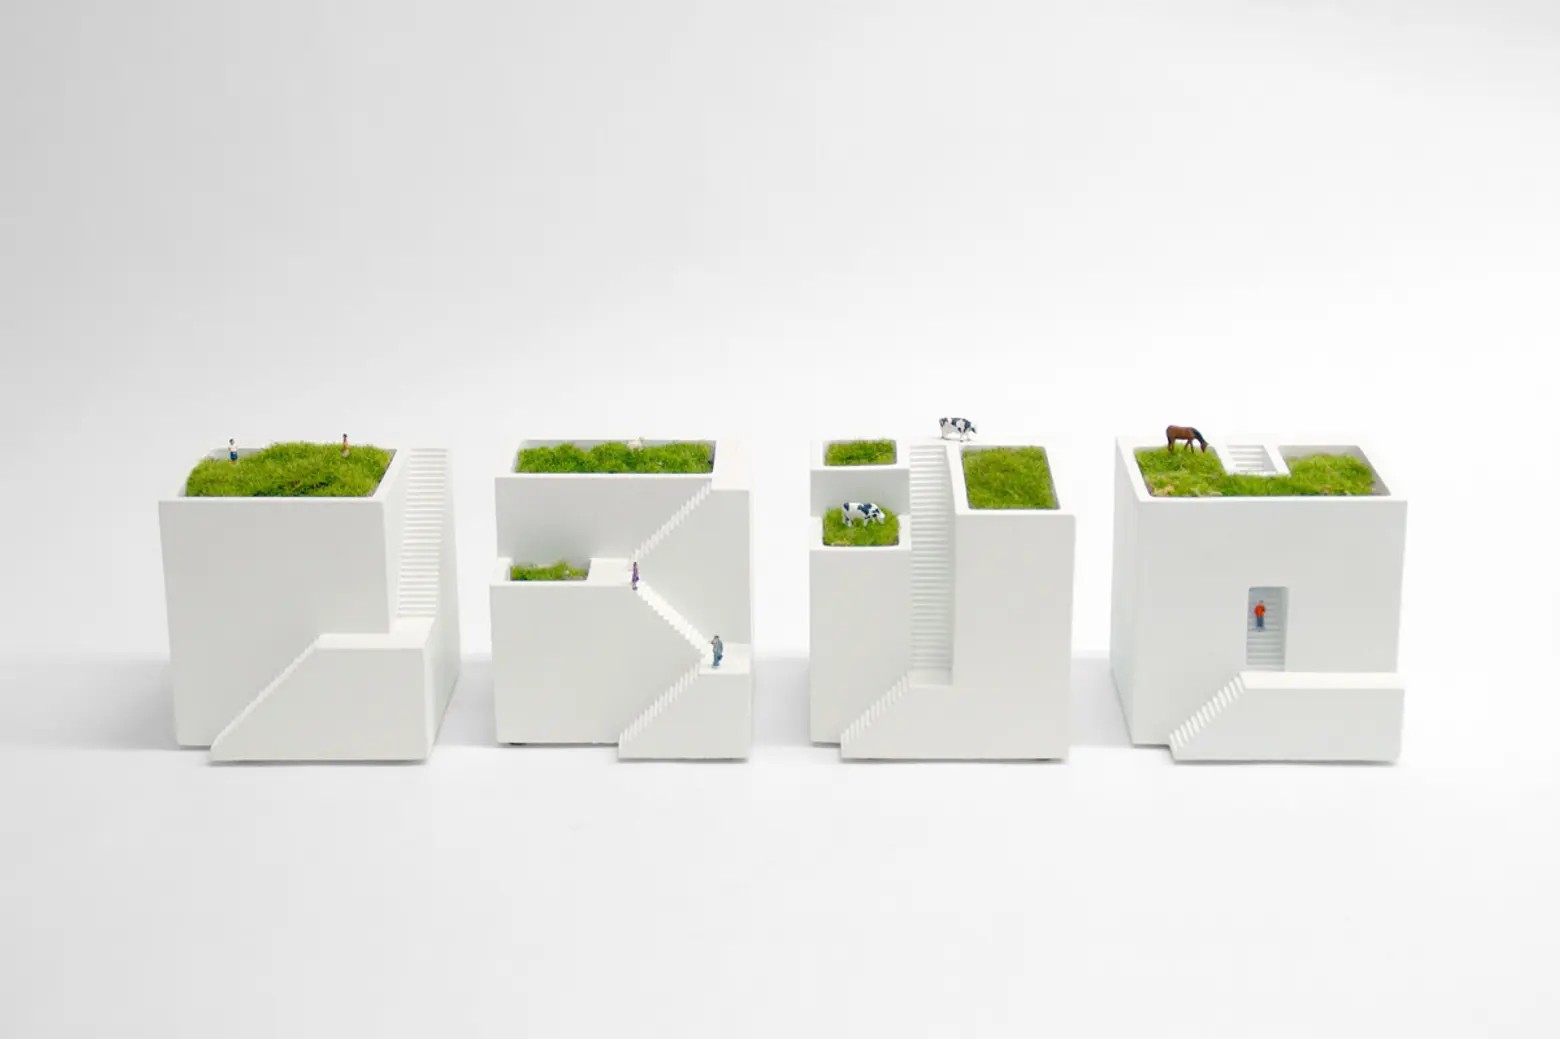 Ienami Bonkei Planters Are Tiny Houses with Green Roofs